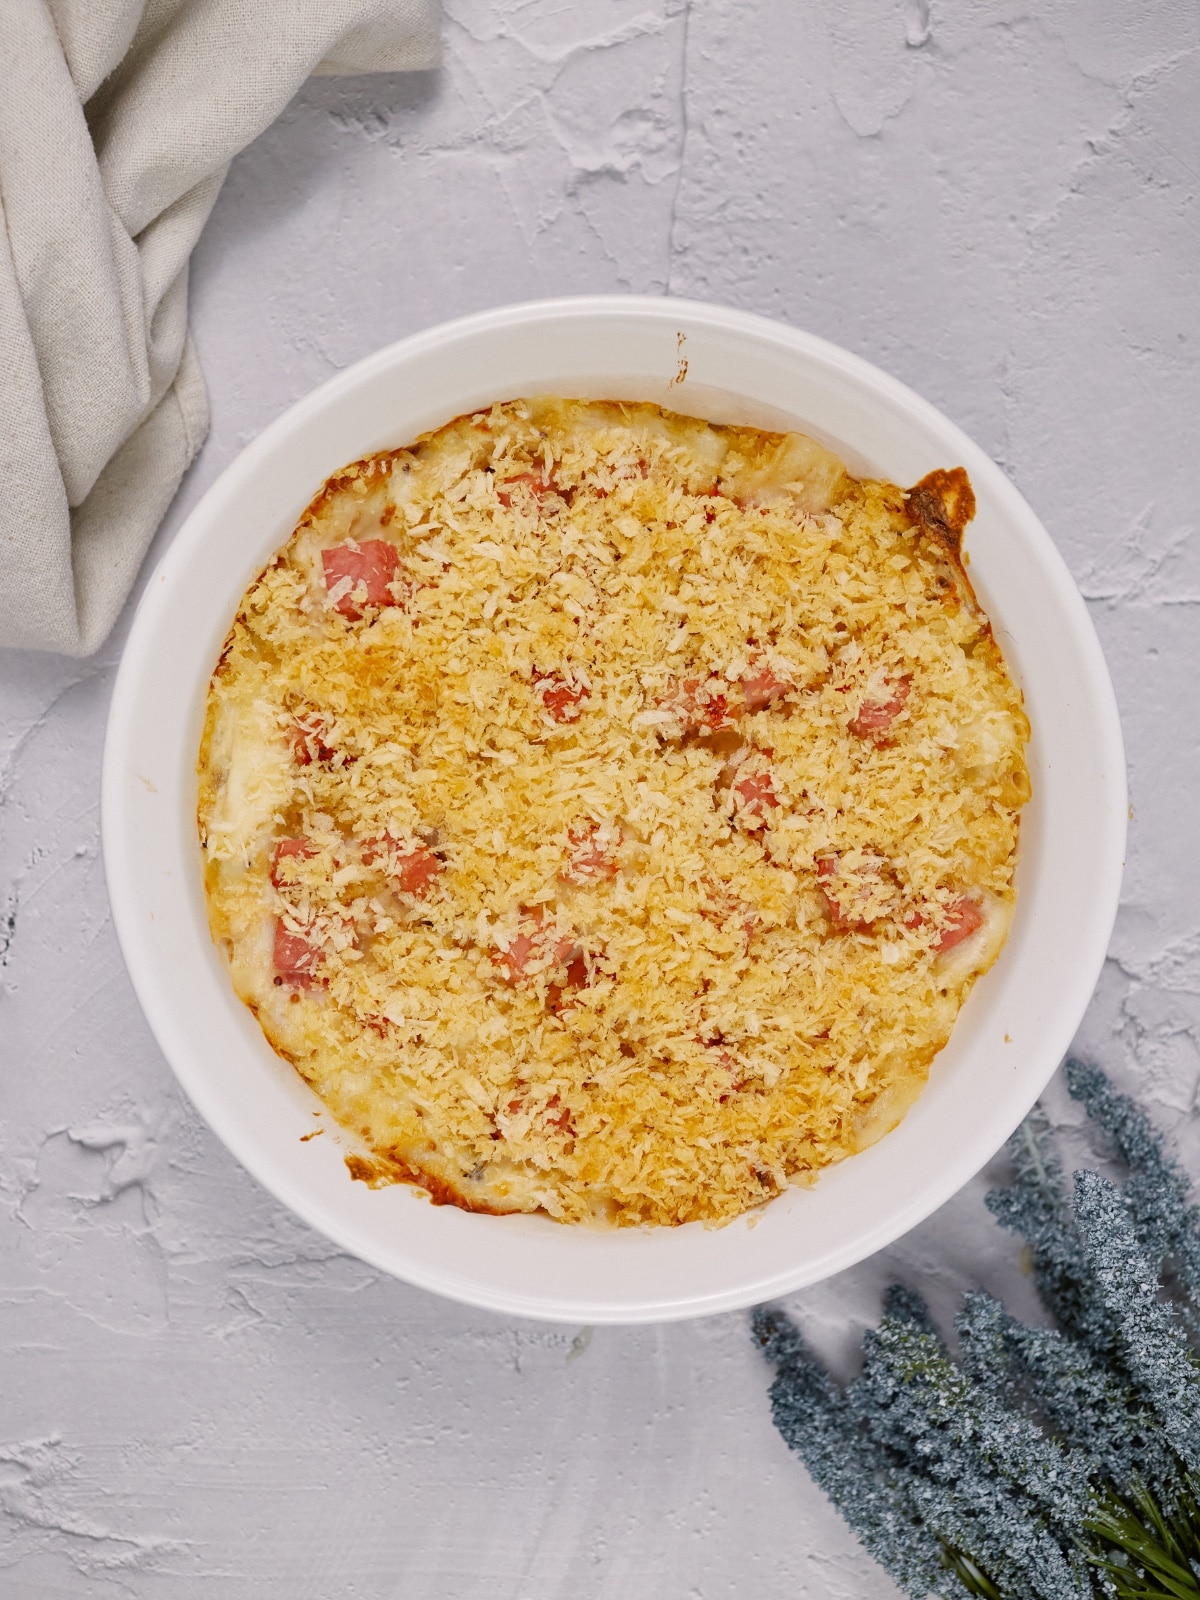 chicken cordon bleu casserole baked in a round dish and sitting on a white surface